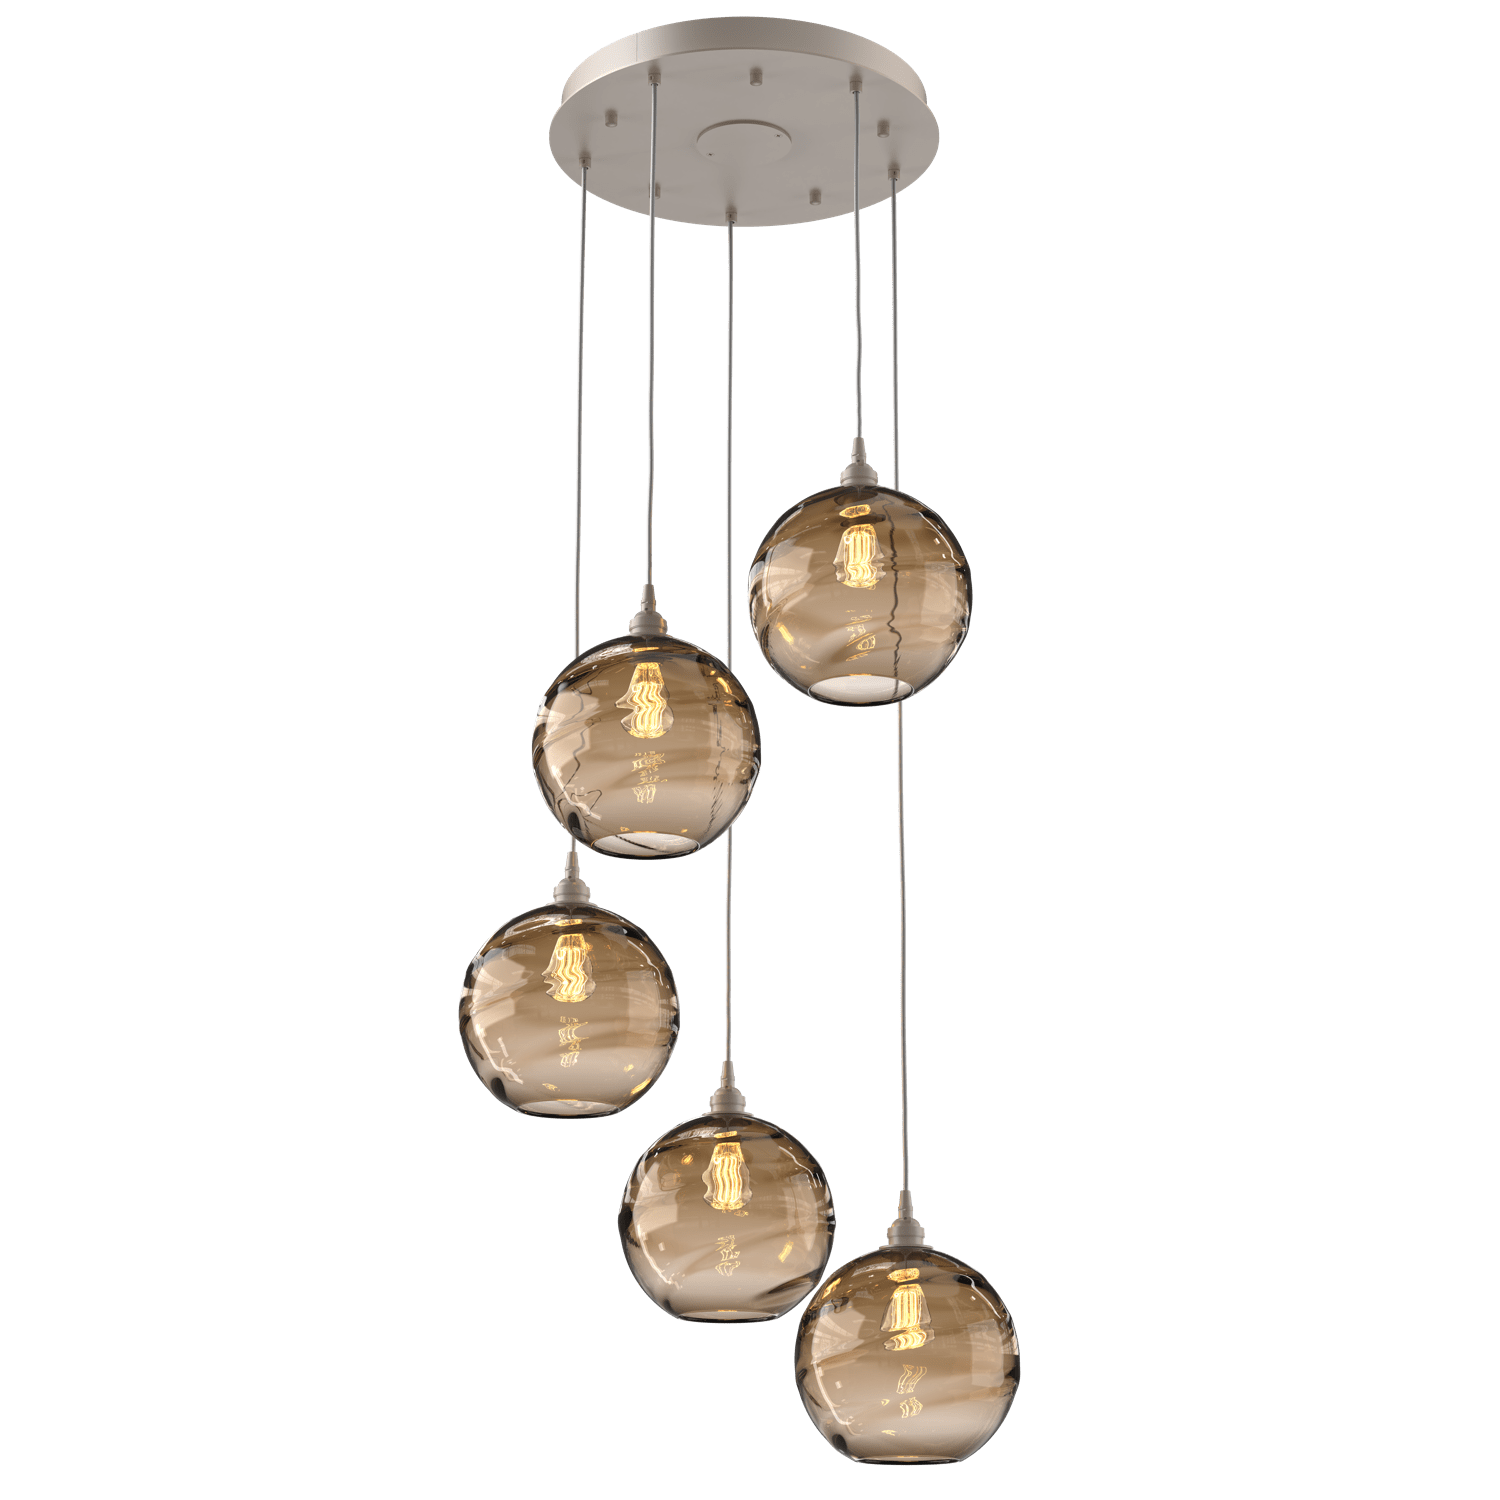 CHB0047-05-BS-OB-Hammerton-Studio-Optic-Blown-Glass-Terra-5-light-round-pendant-chandelier-with-metallic-beige-silver-finish-and-optic-bronze-blown-glass-shades-and-incandescent-lamping